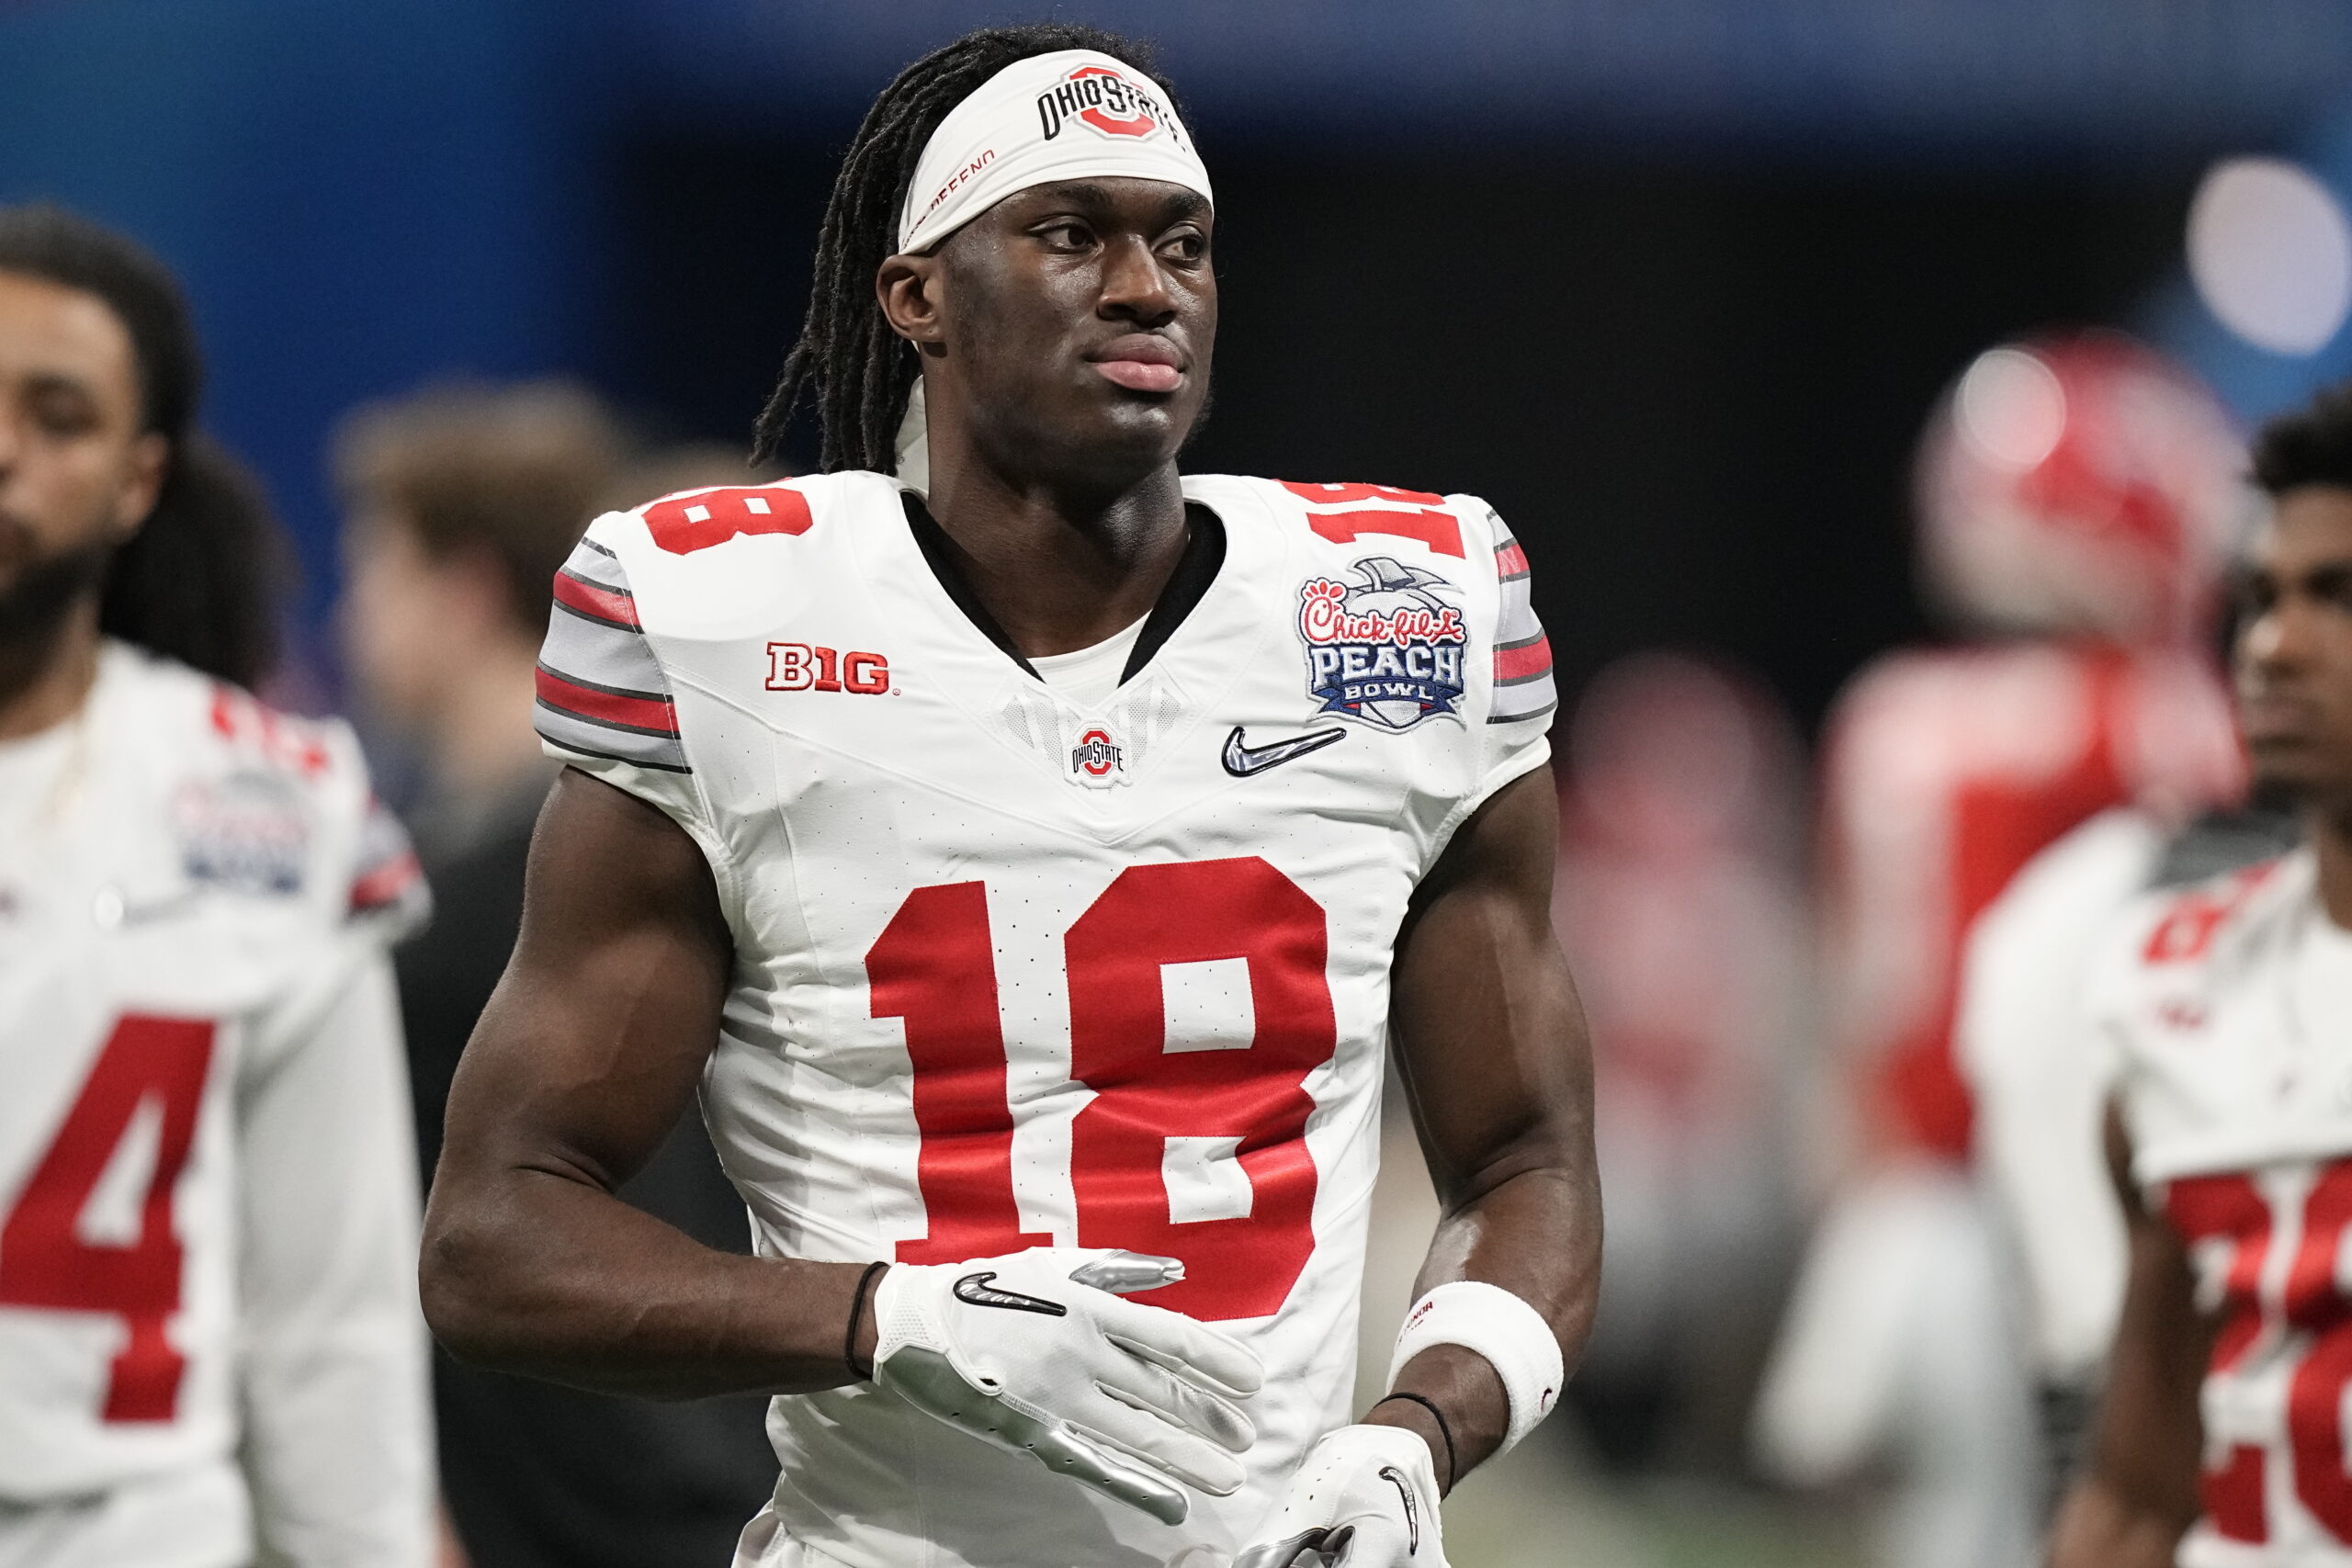 ESPN REPORT Marvin Harrison jr. with Buckeyes at Cotton, But Cannot